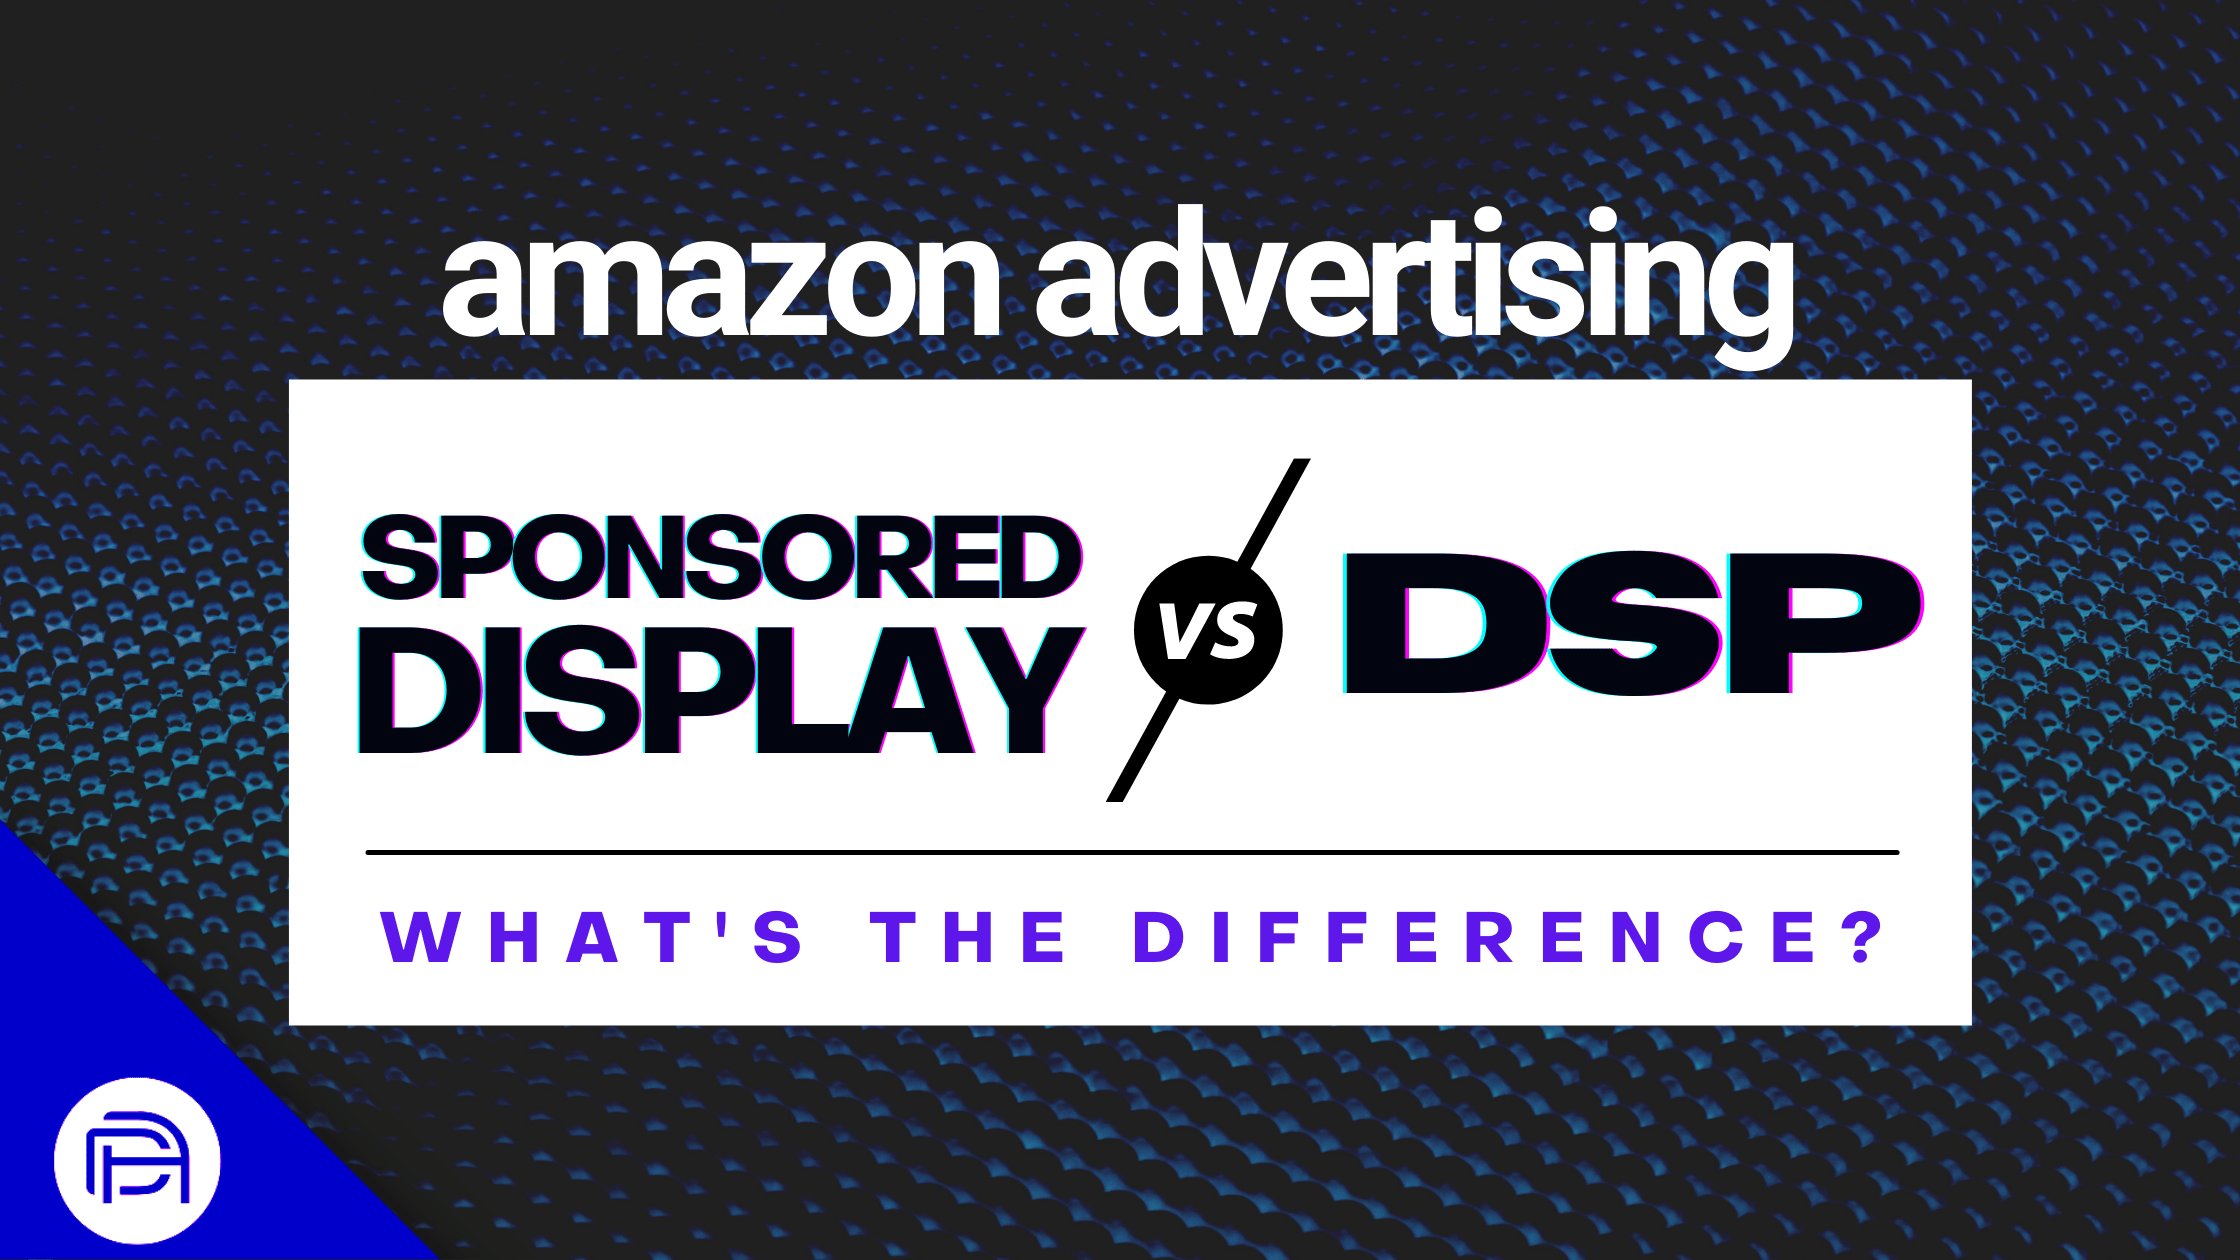 Amazon Advertising Sponsored Display VS DSP: What’s the Difference?